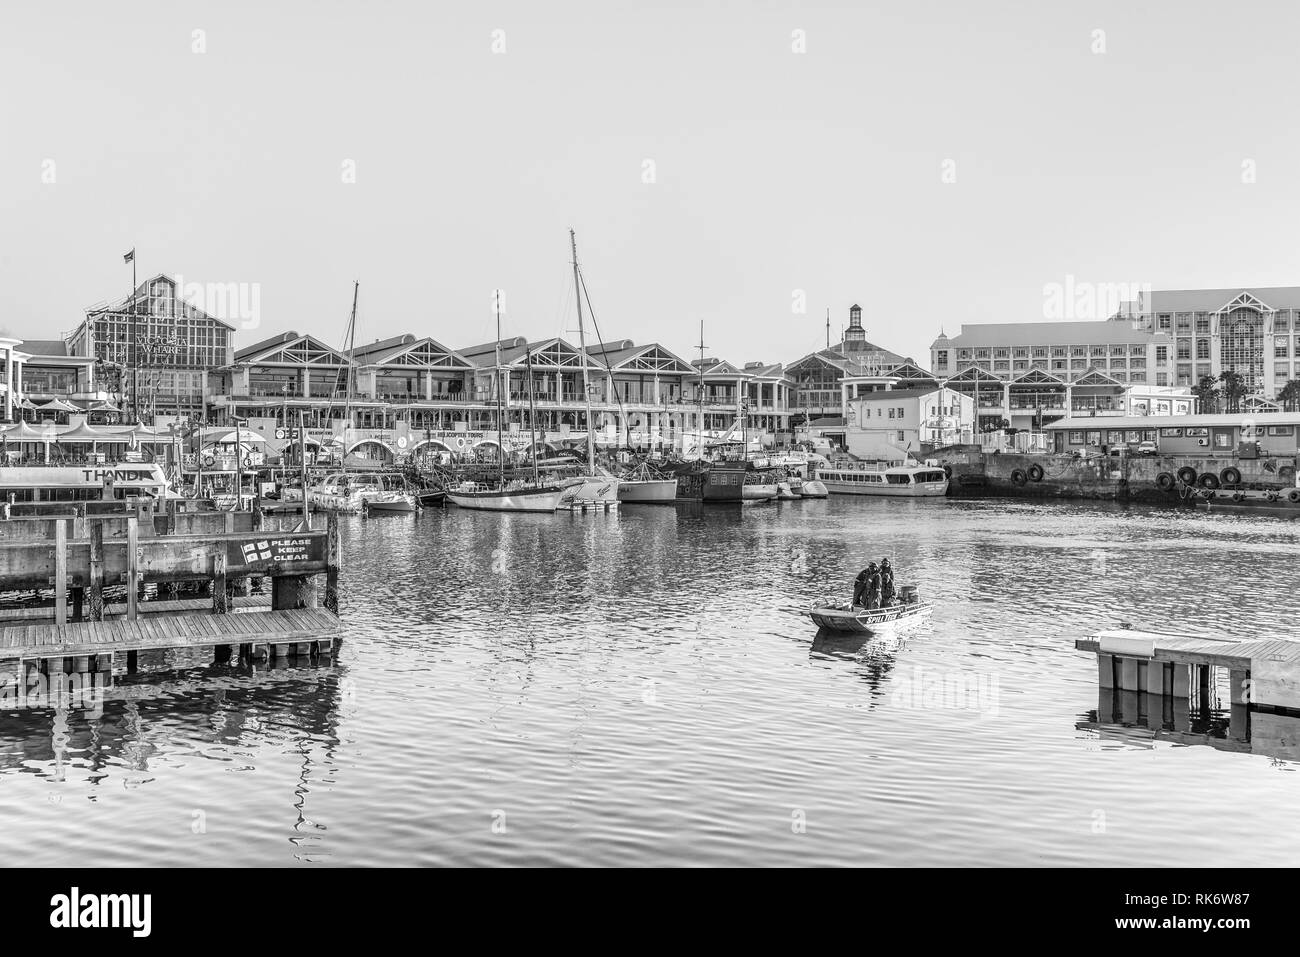 CAPE TOWN, SOUTH AFRICA, AUGUST 9, 2018: Monochrome view of the harbor and the Victoria and Alfred Waterfront in Cape Town in the Western Cape Provinc Stock Photo